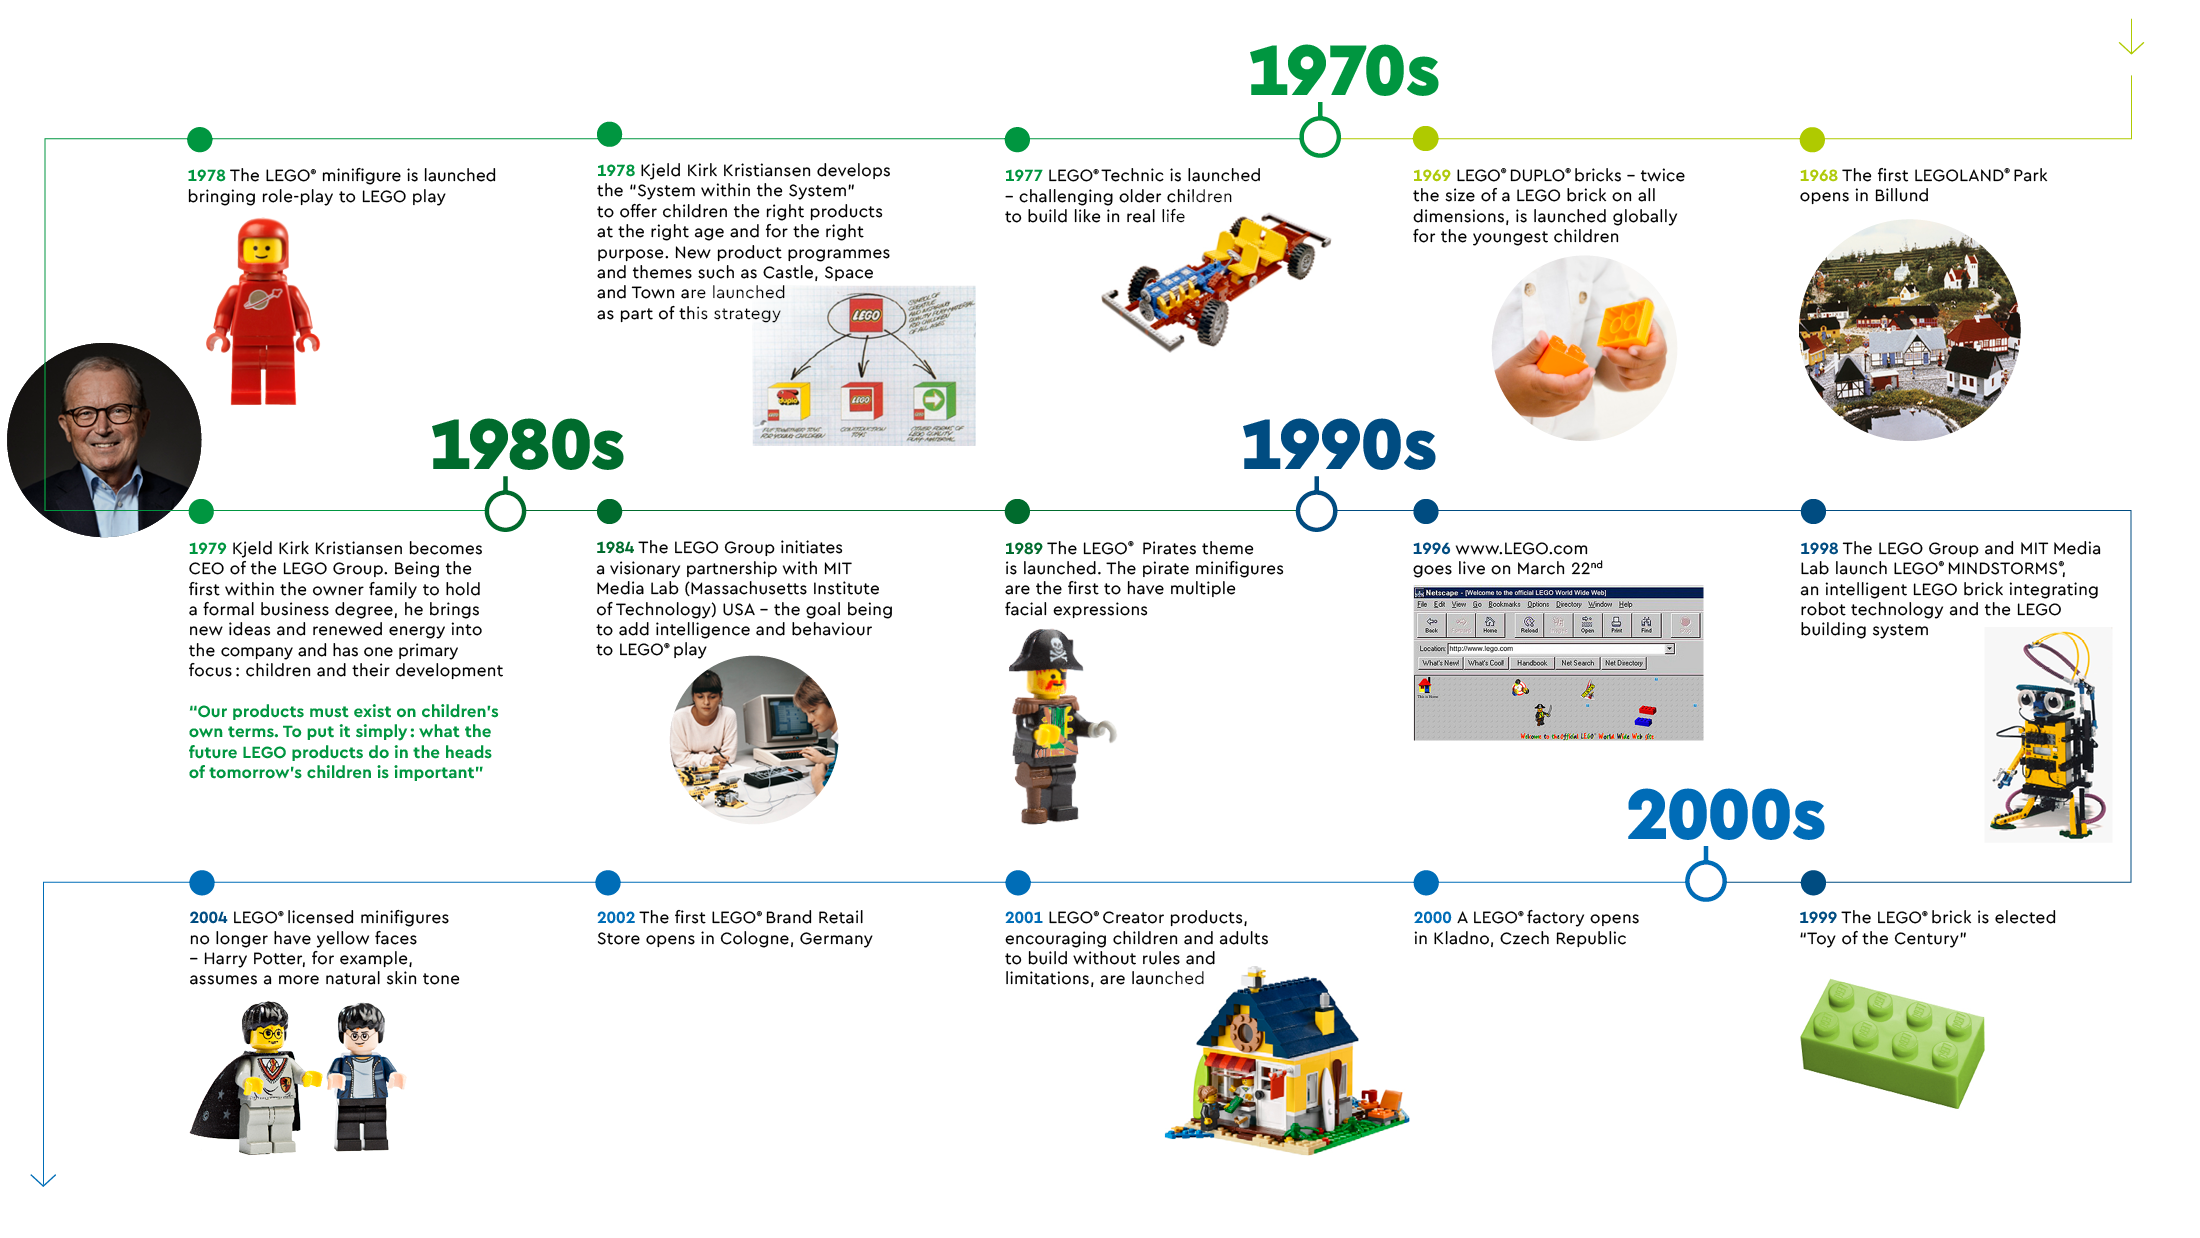 The LEGO Group History - The LEGO Group 